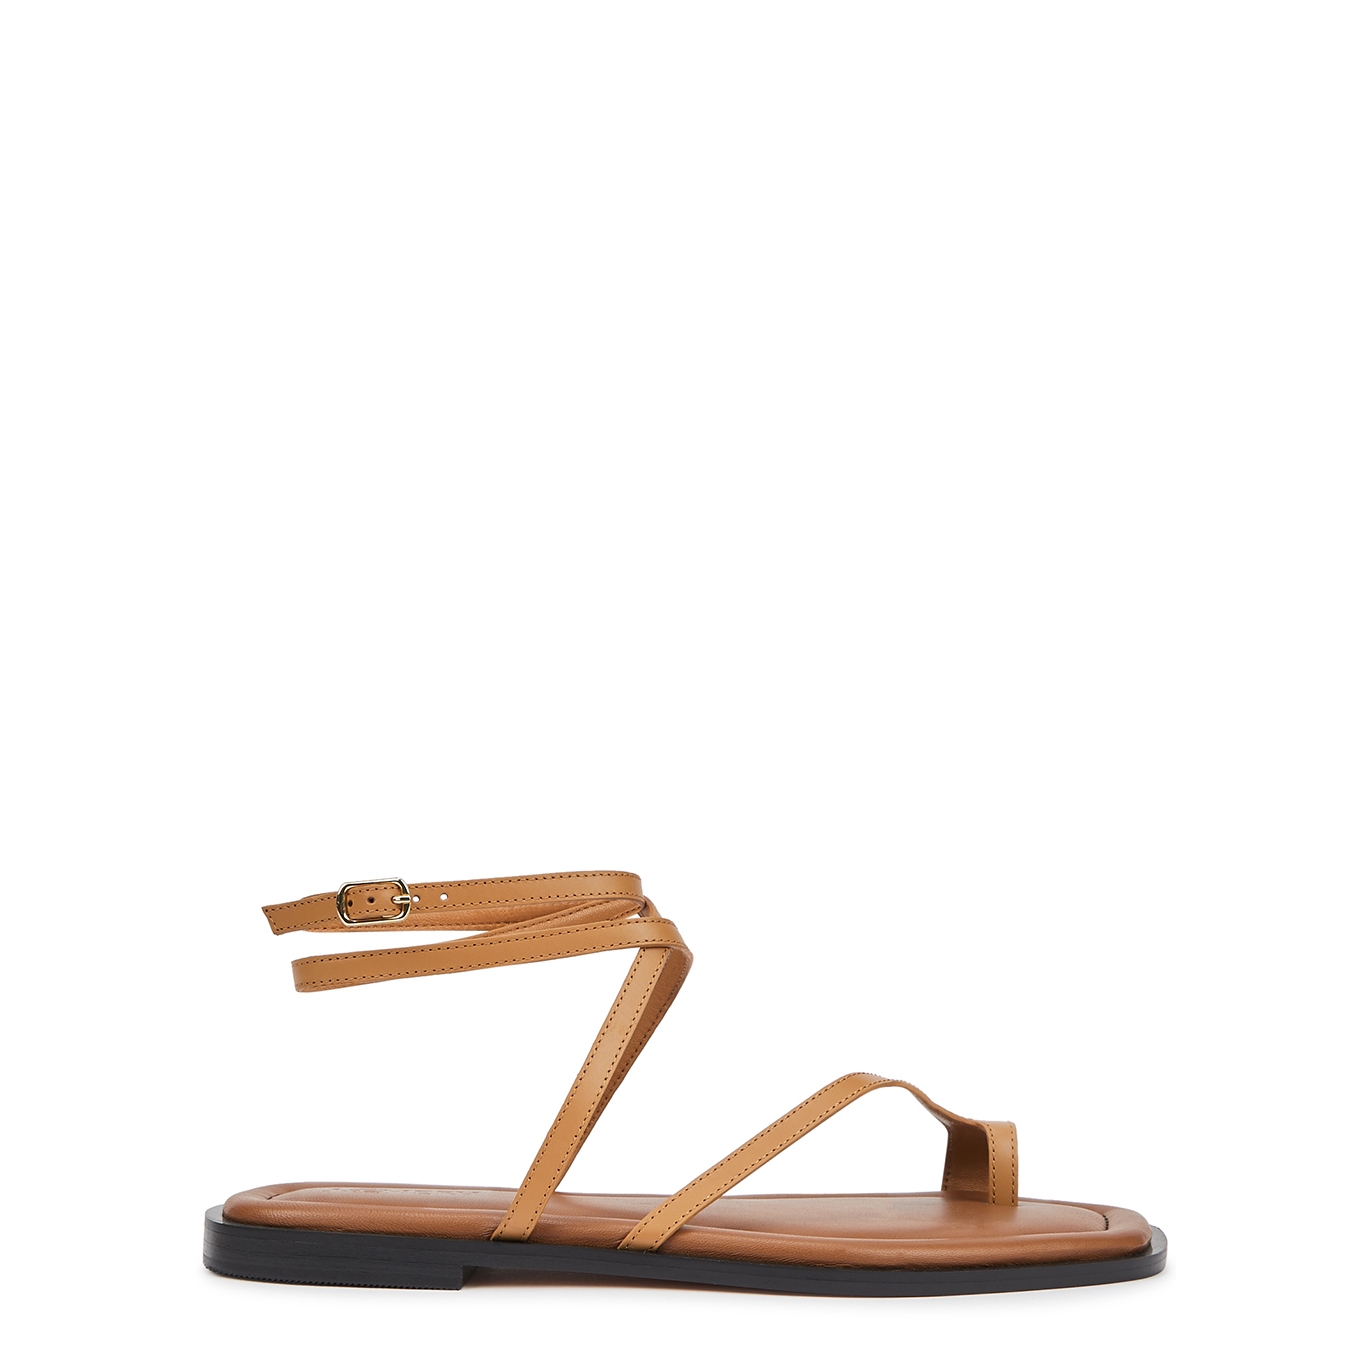 A.Emery Piper Leather Thong Sandals